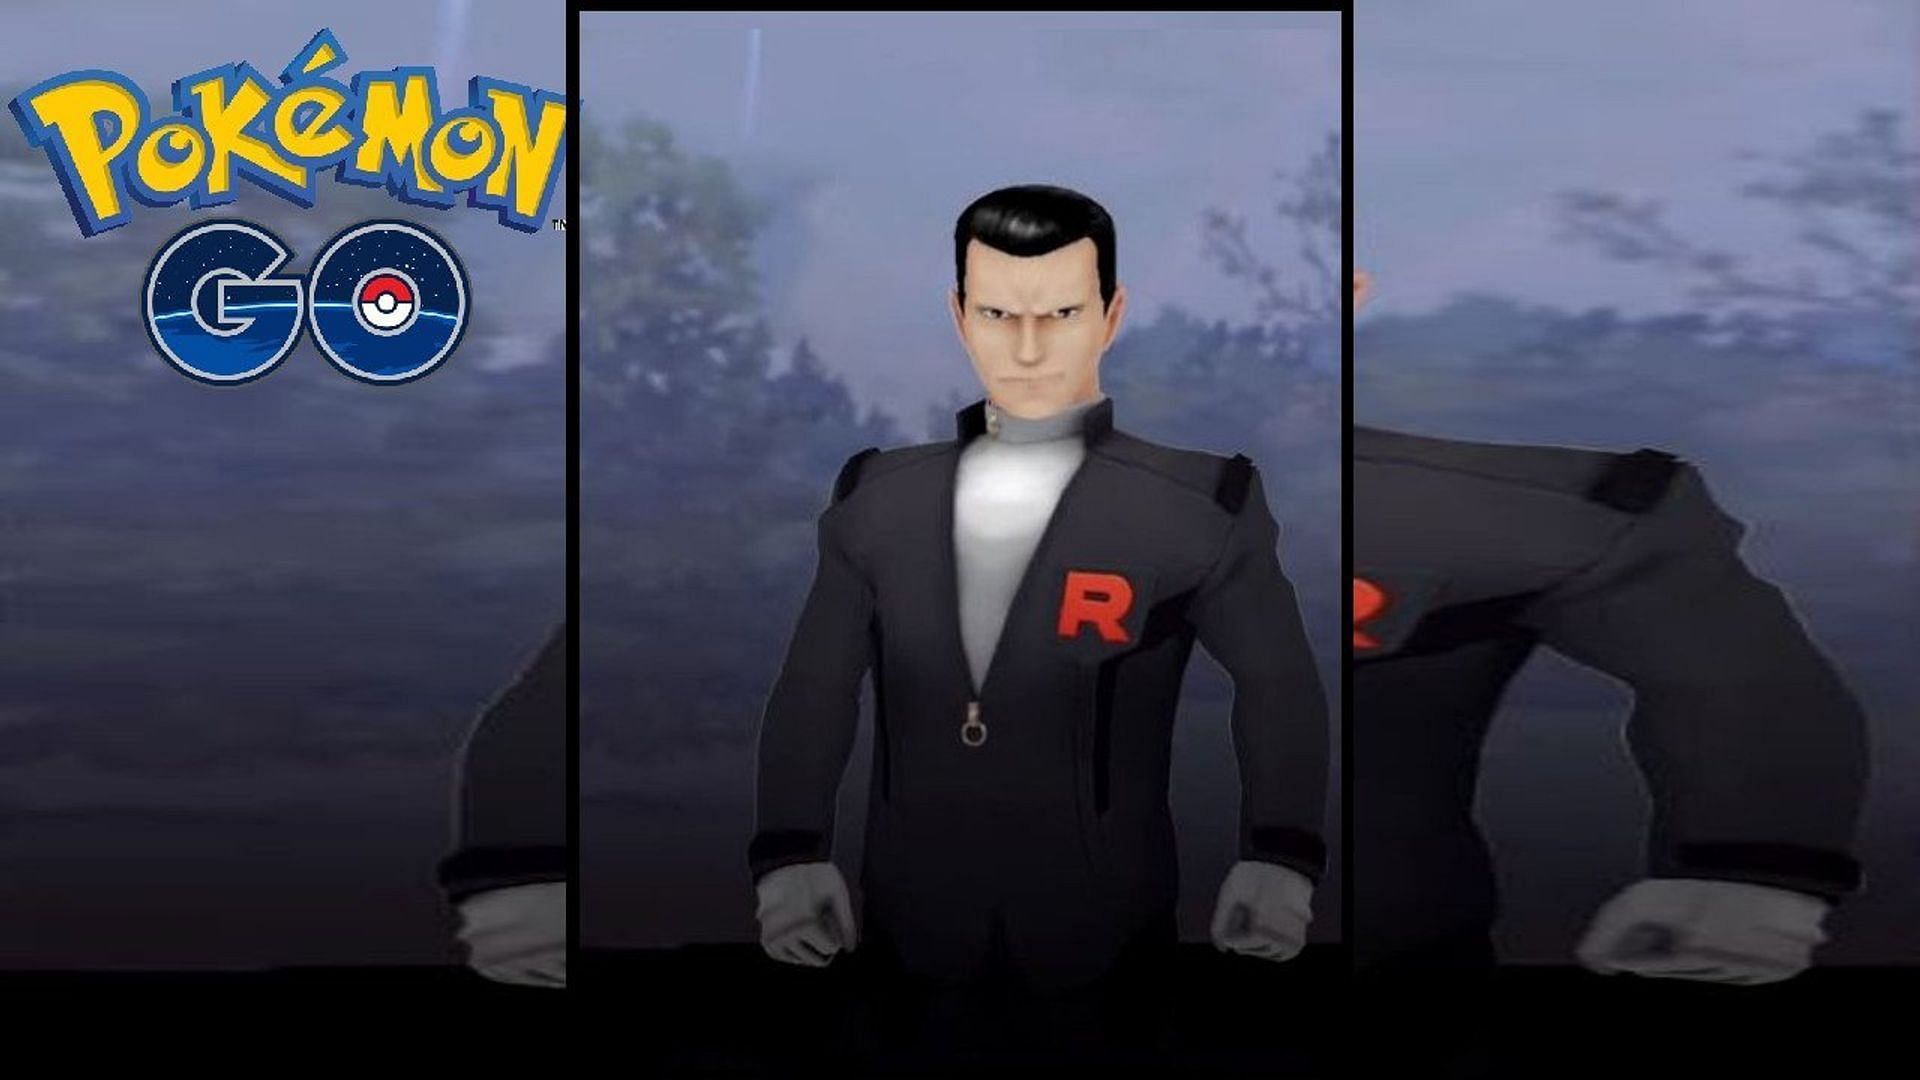 Giovanni as he appears in Pokemon GO (Image via Niantic/Future Game Releases)